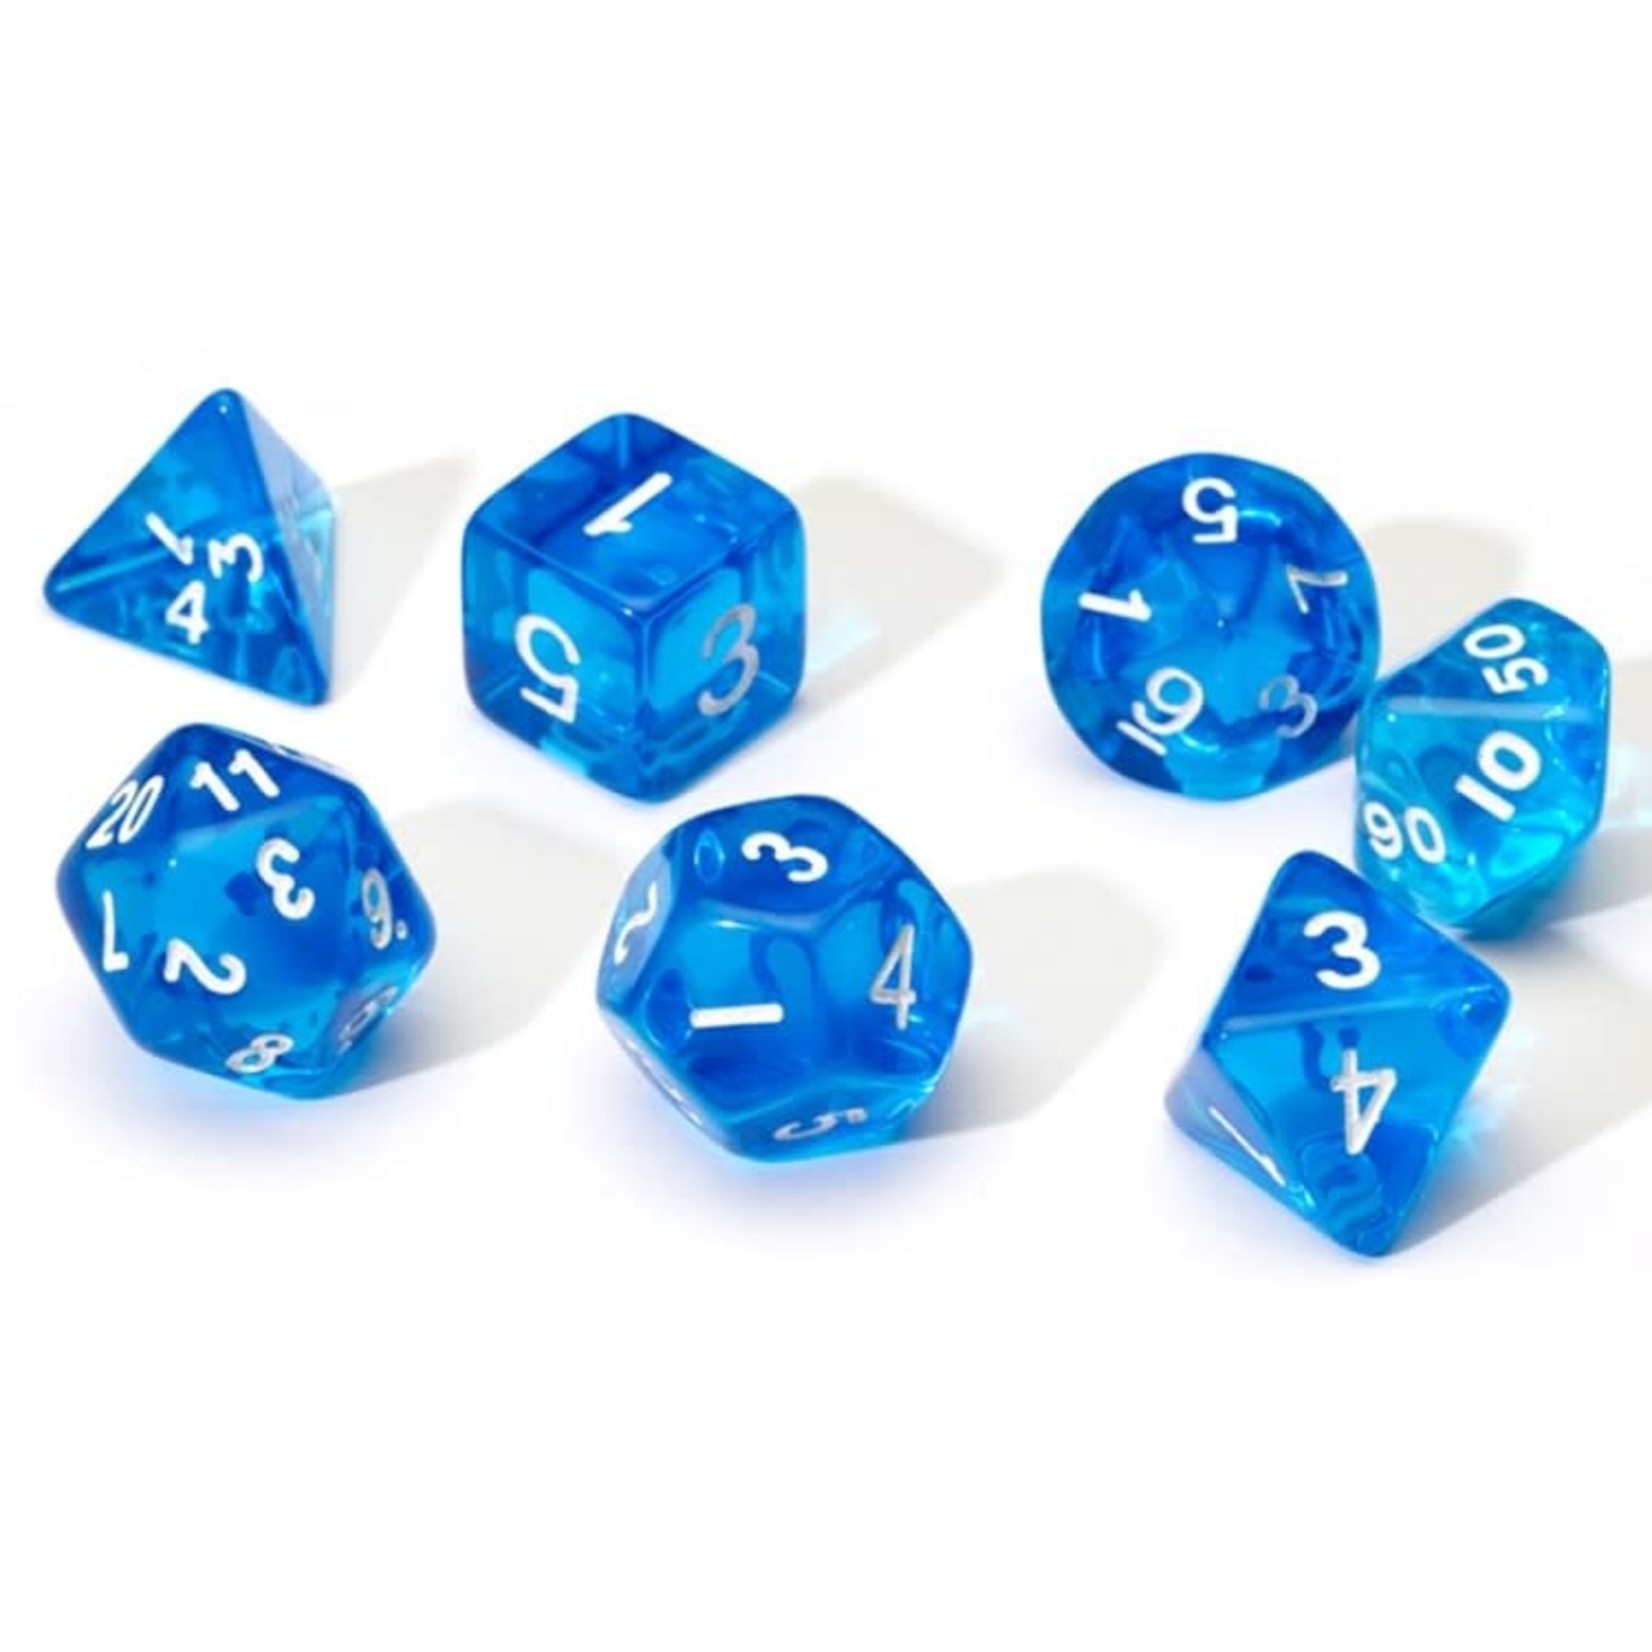 Sirius RPG Dice Translucent Blue with White Polyhedral 8 die set